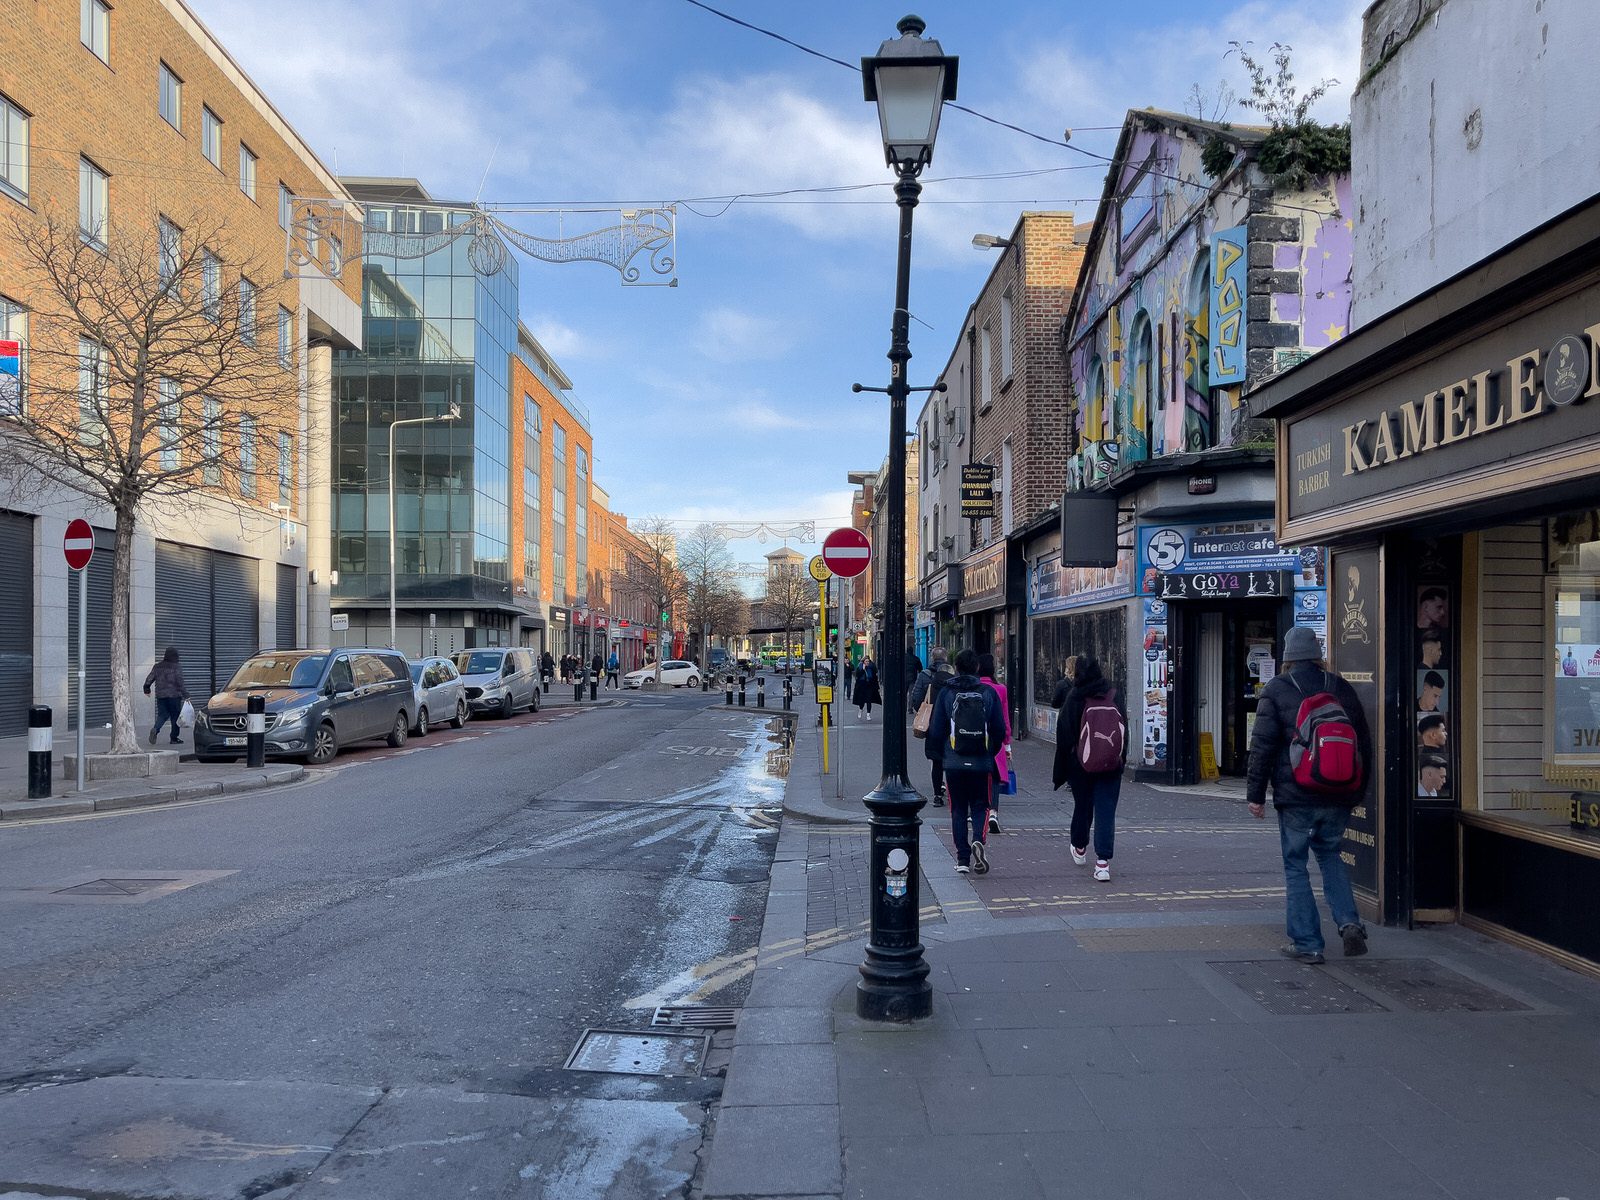 TALBOT STREET [FAILS TO MEET ITS POTENTIAL AS A MAJOR SHOPPING STREET]-225733-1